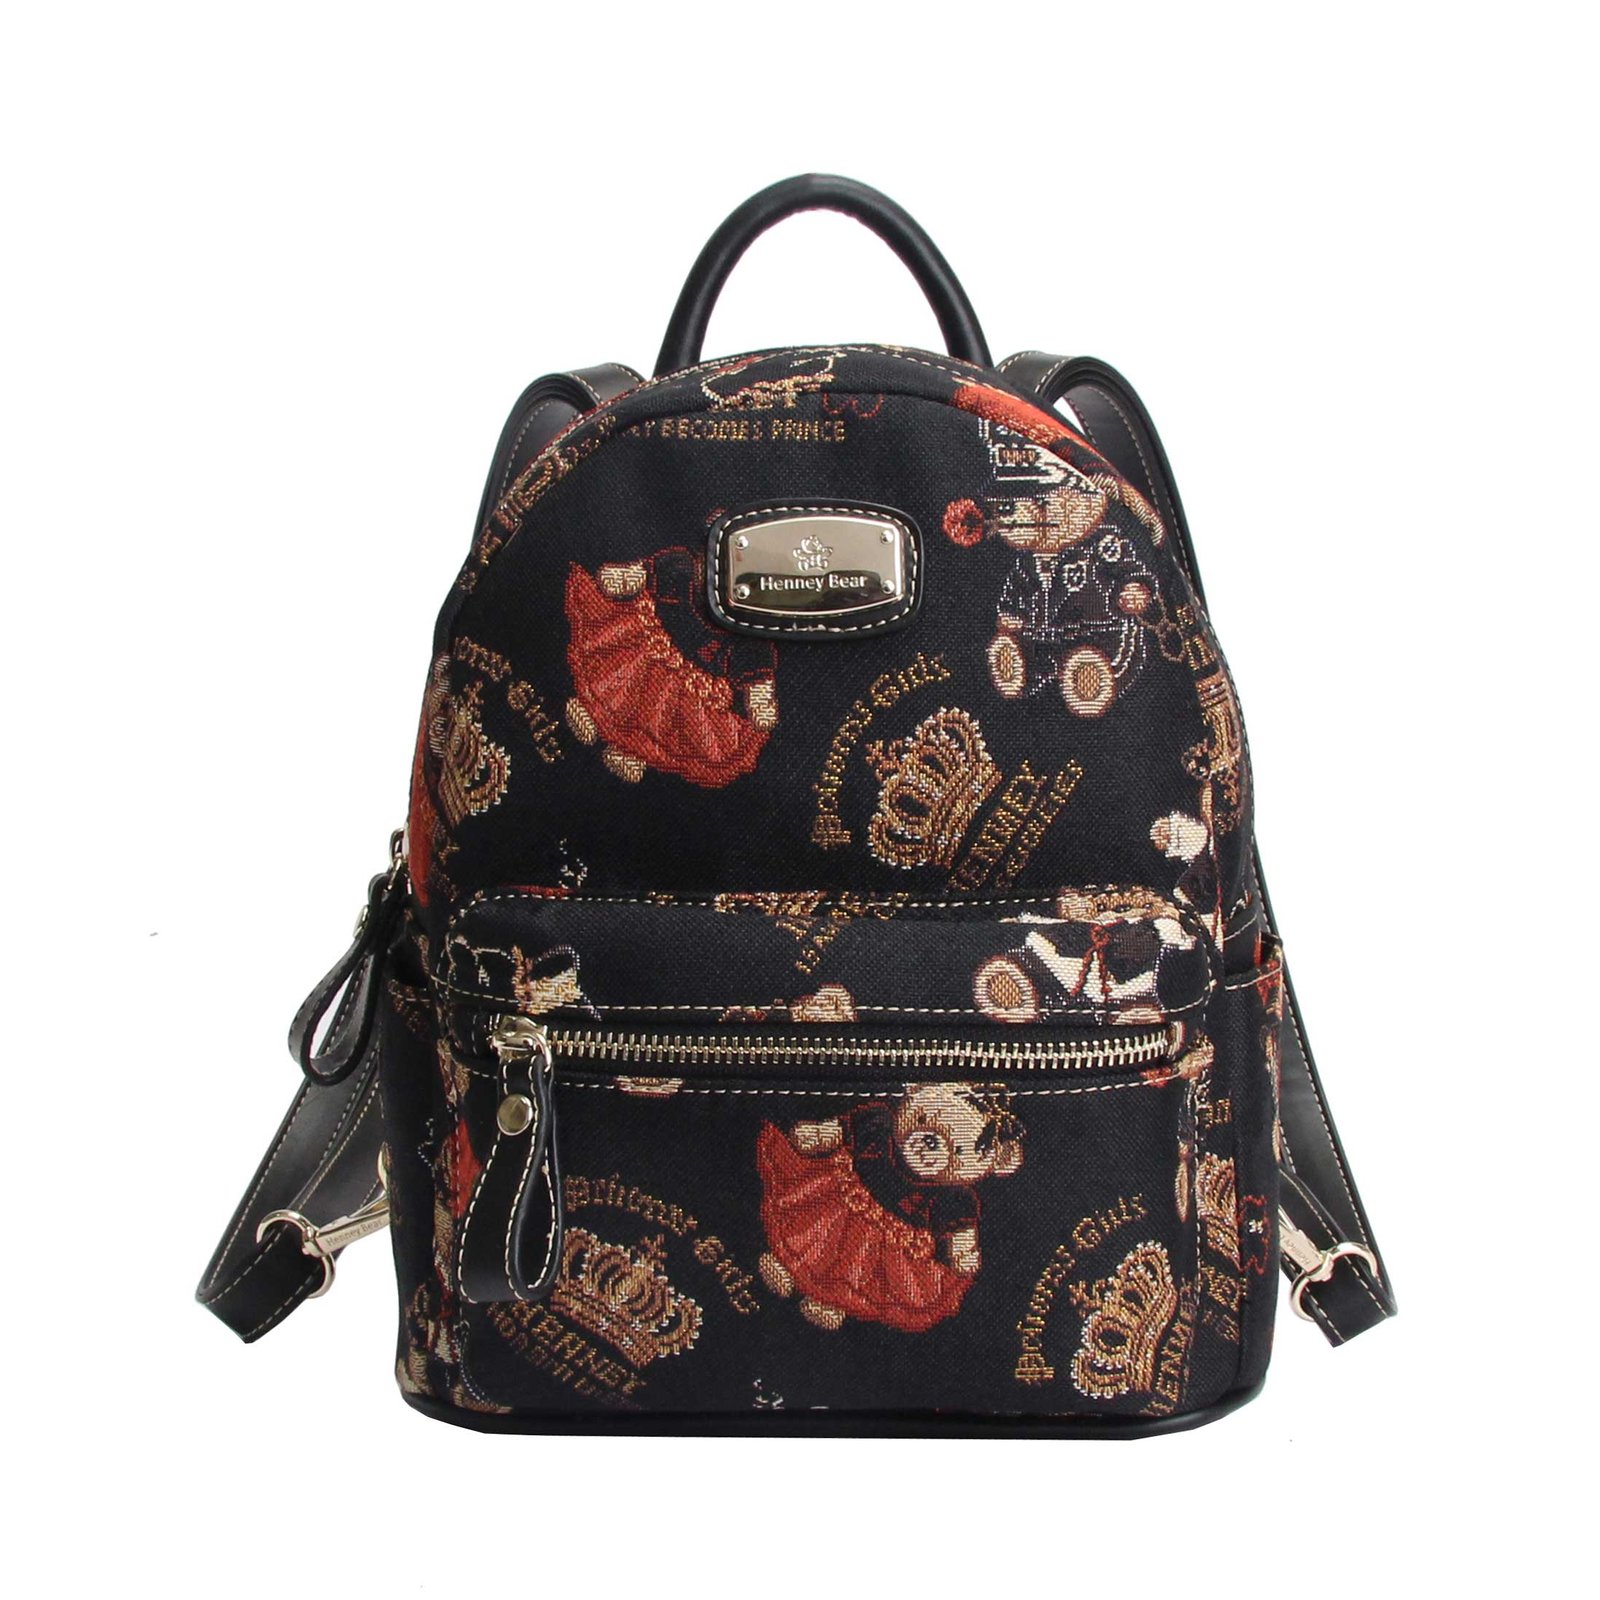 crown bear compact backpack henney bear